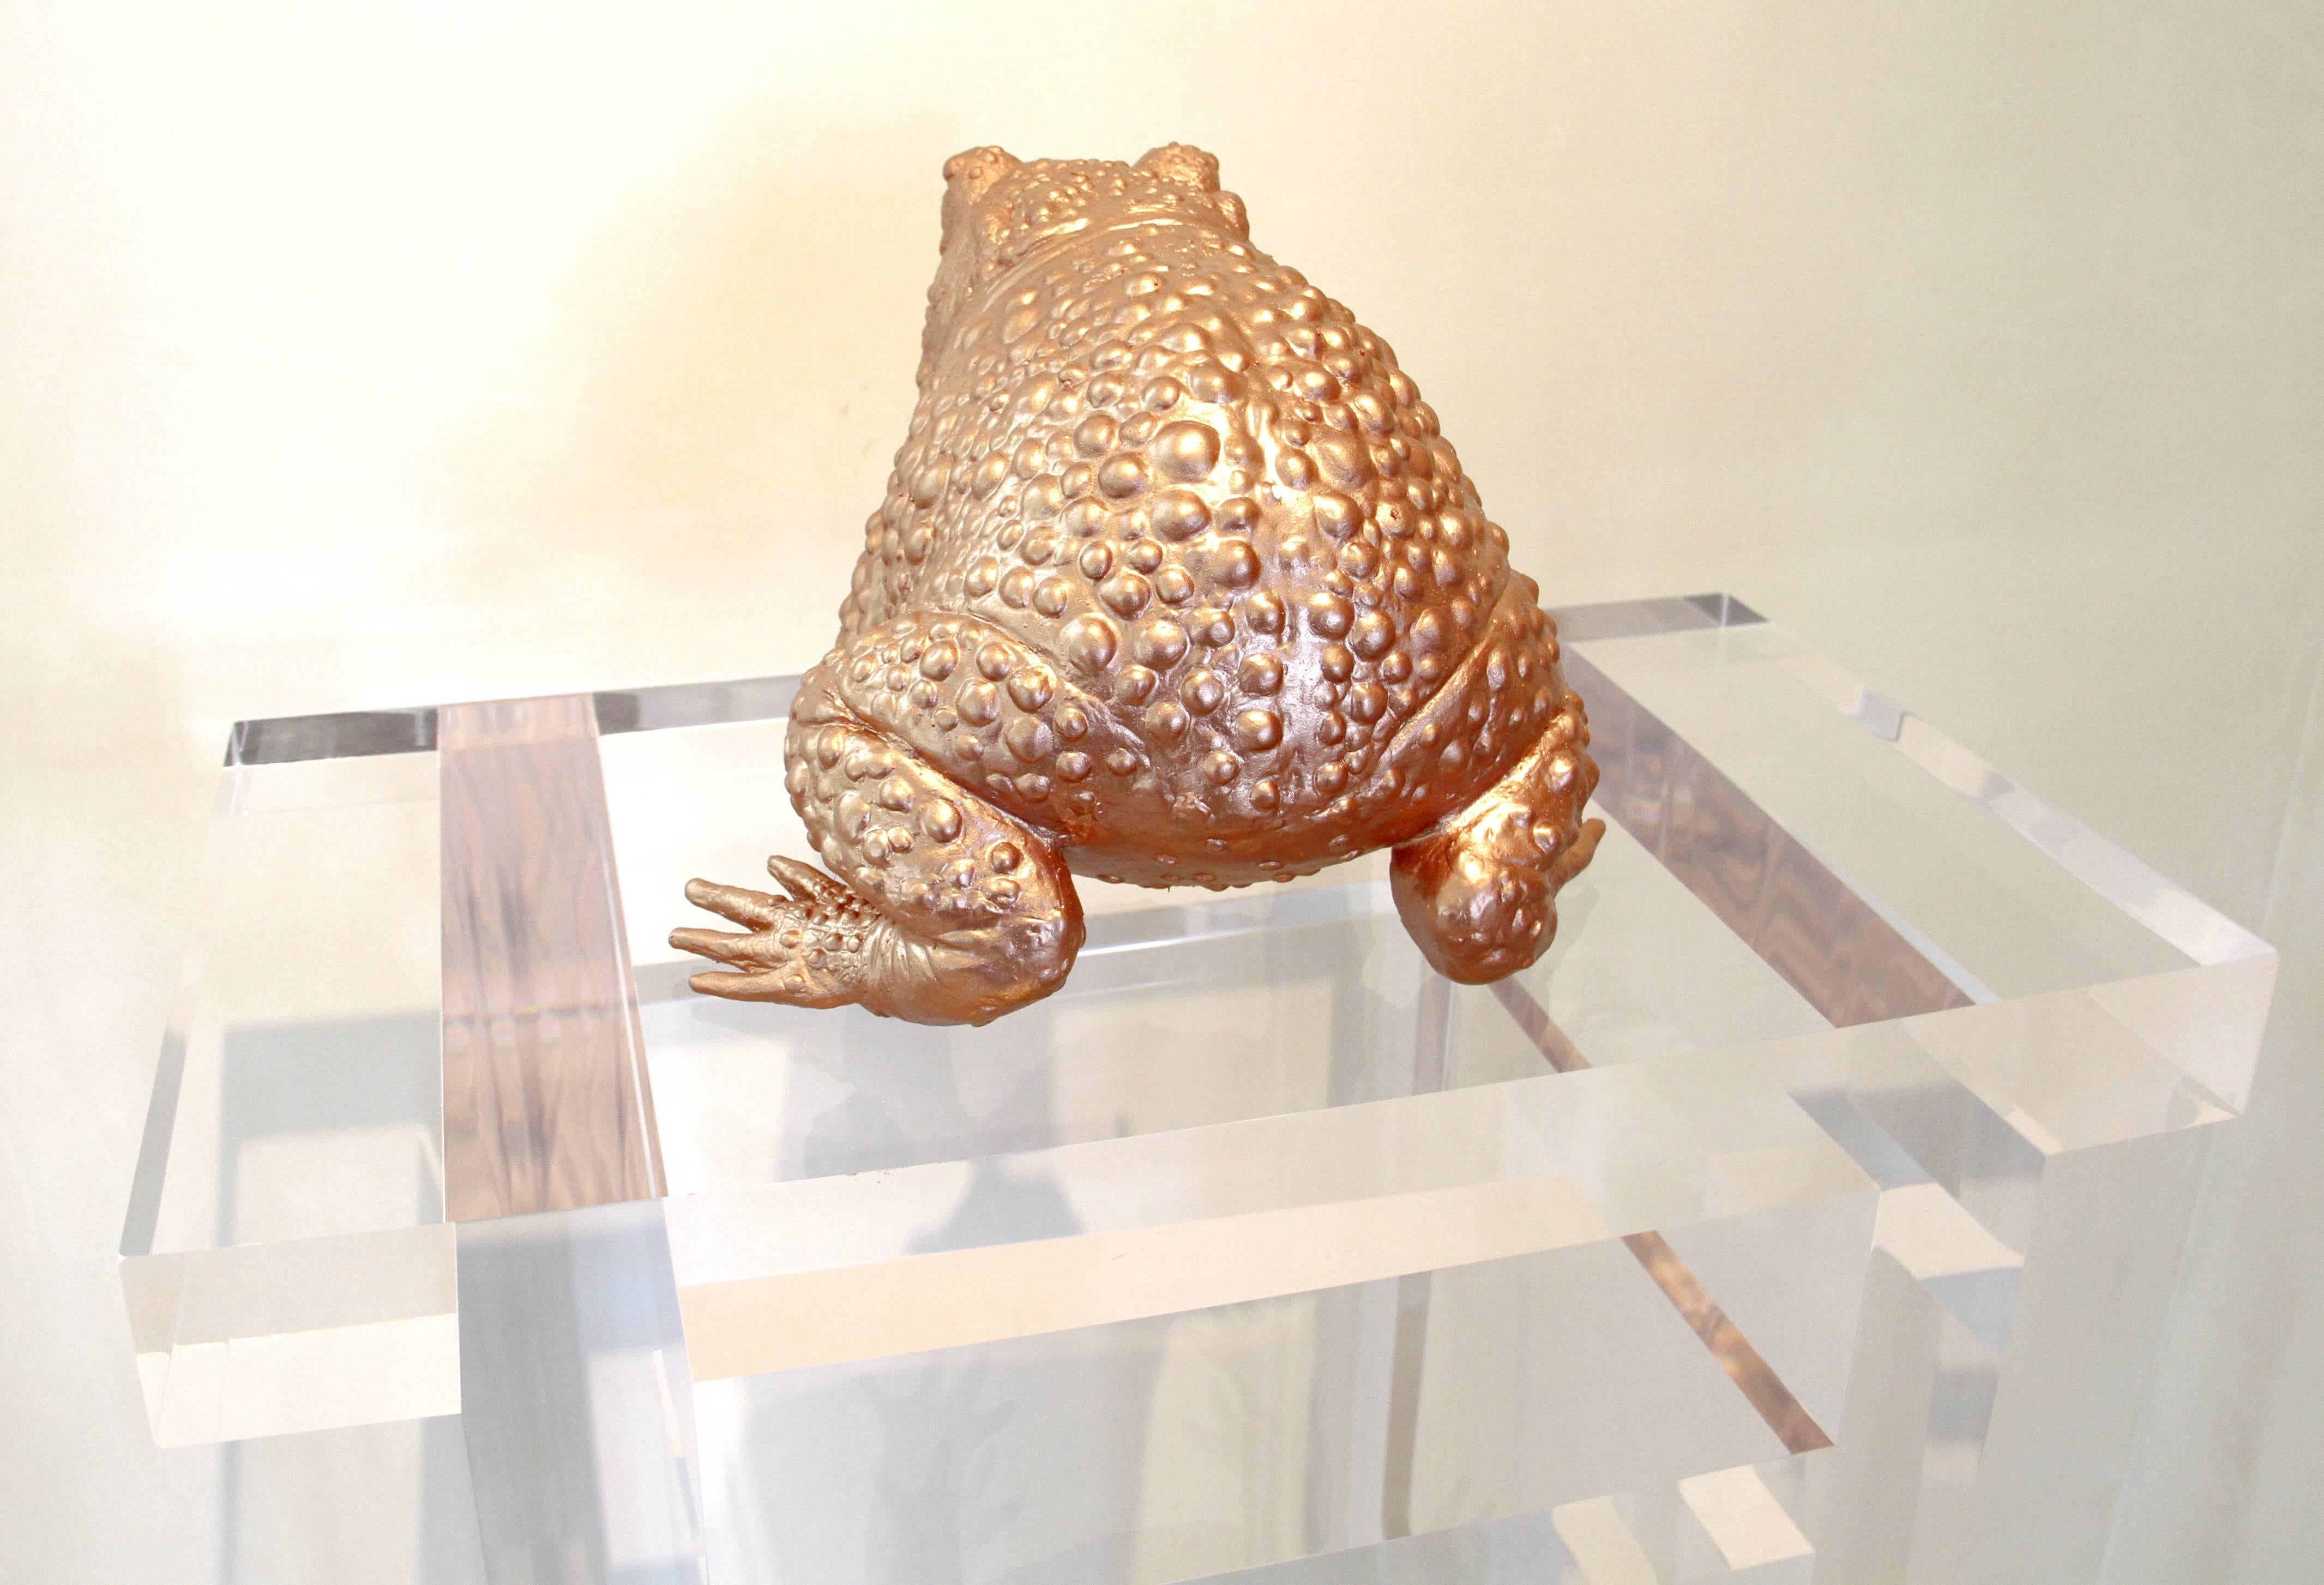 The perfect item or gift for decorating a surface in a home or office. This money frog is hand gilded with copper. We also make this frog gilded with 24-karat gold, the last photo, for your reference. It is also gilded in platinum if the design